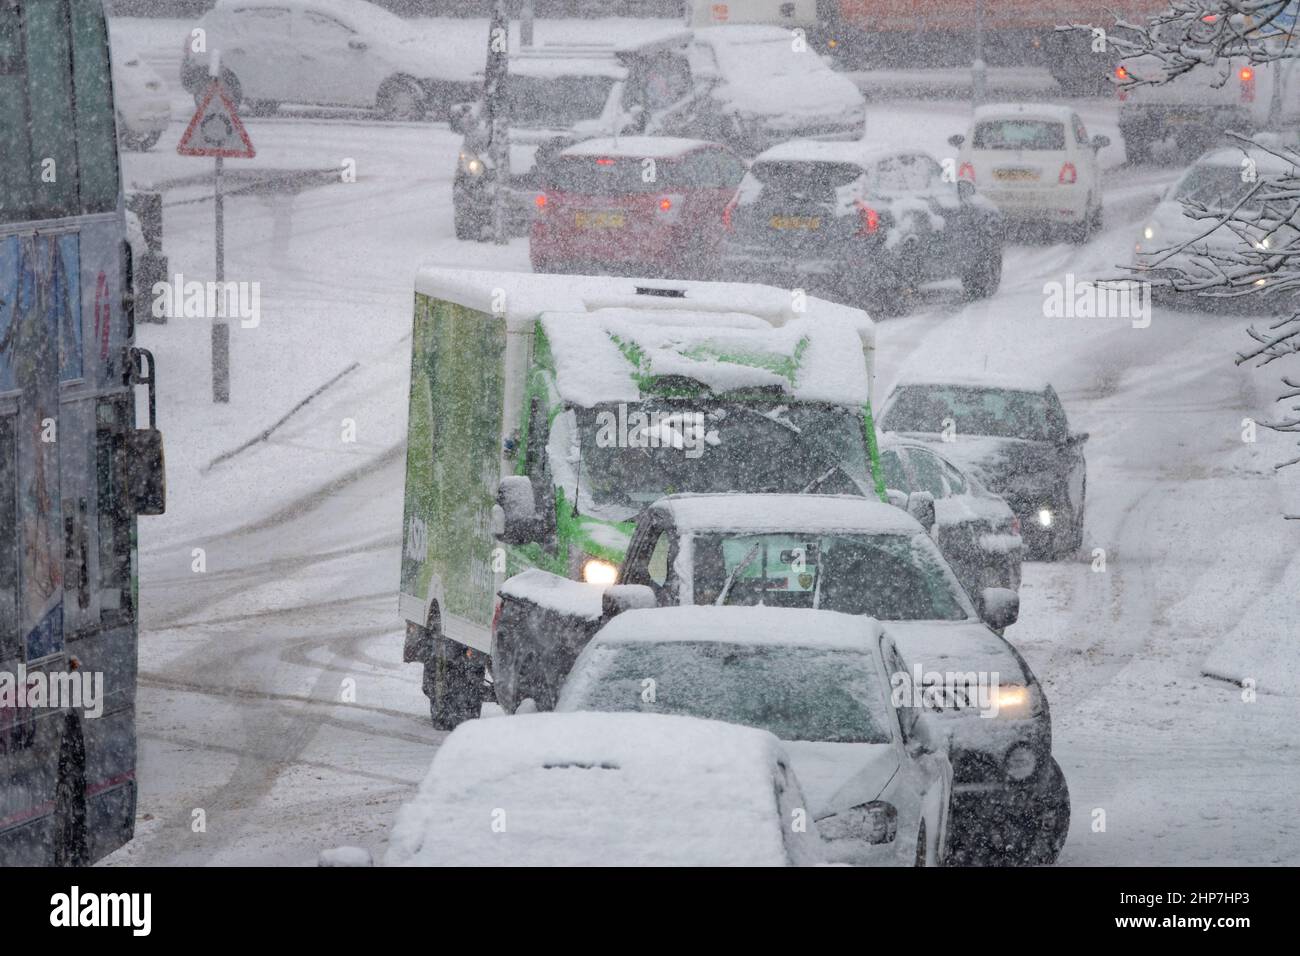 Snow and ice causing disruption on the hills around Bradford, West Yorkshire, UK. 19th Feb 2022. Cars struggle to move on slippery winter surfaces. Stock Photo